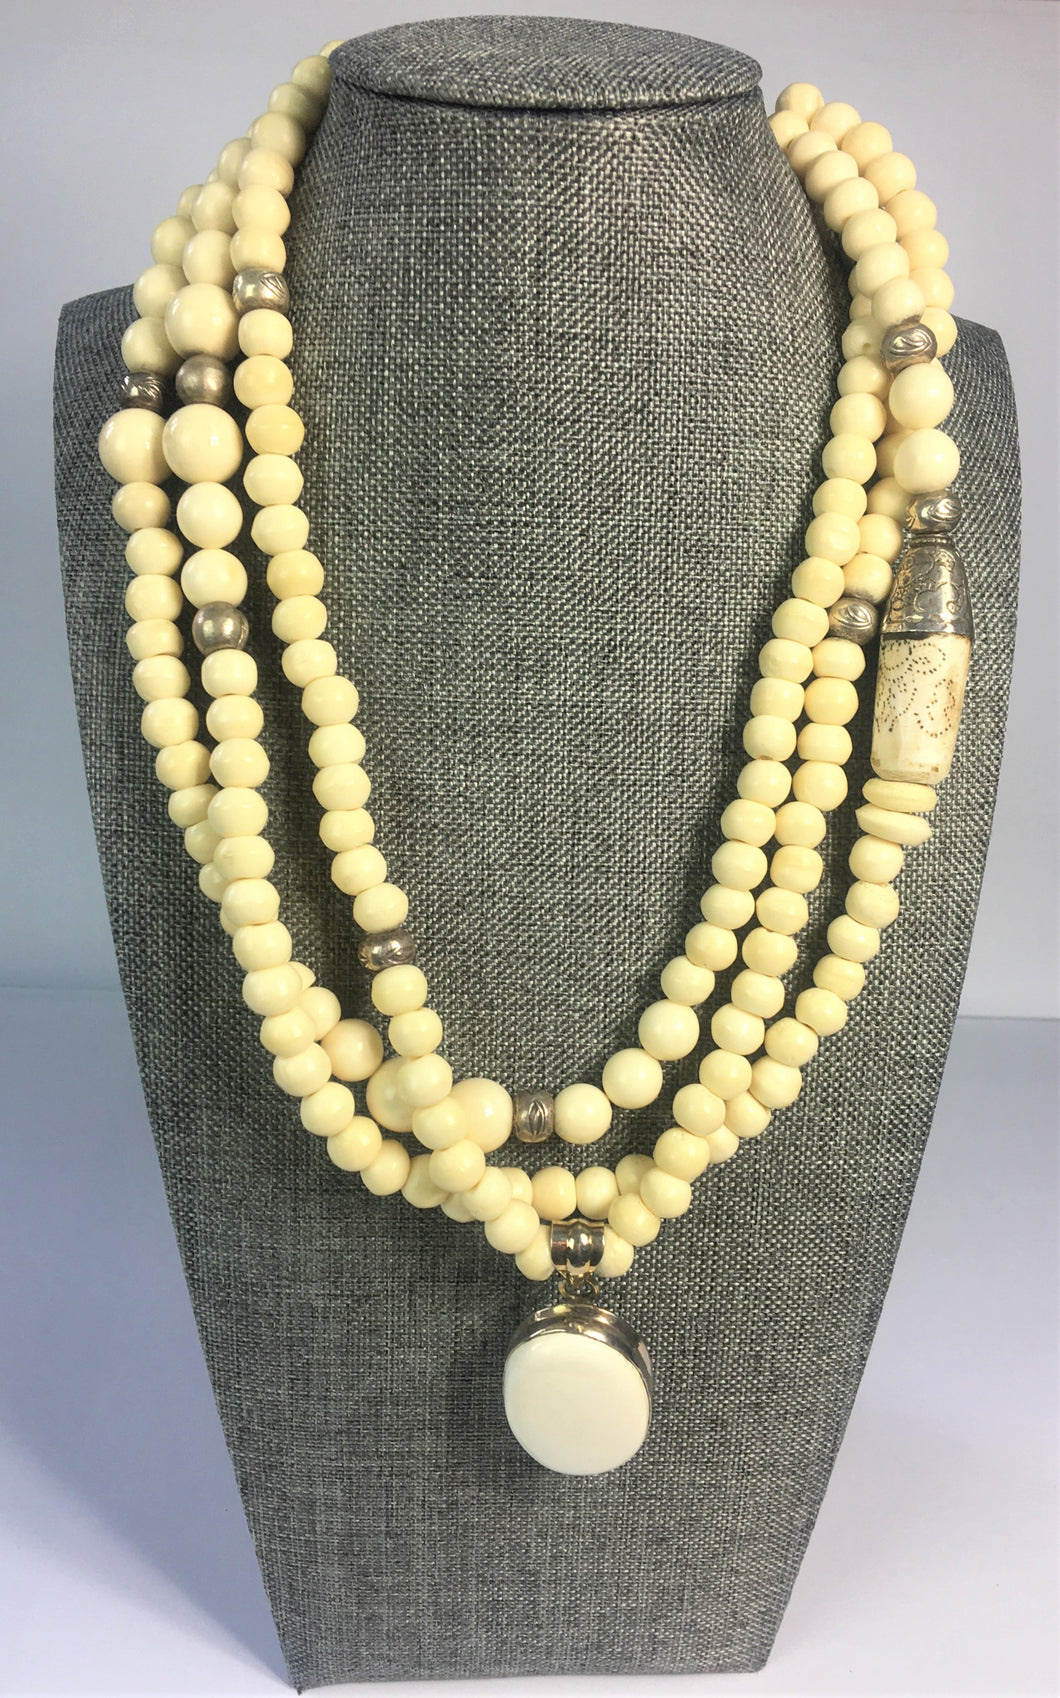 Blonde Bombshell Blonde Agate with White Onyx Pendant Necklace